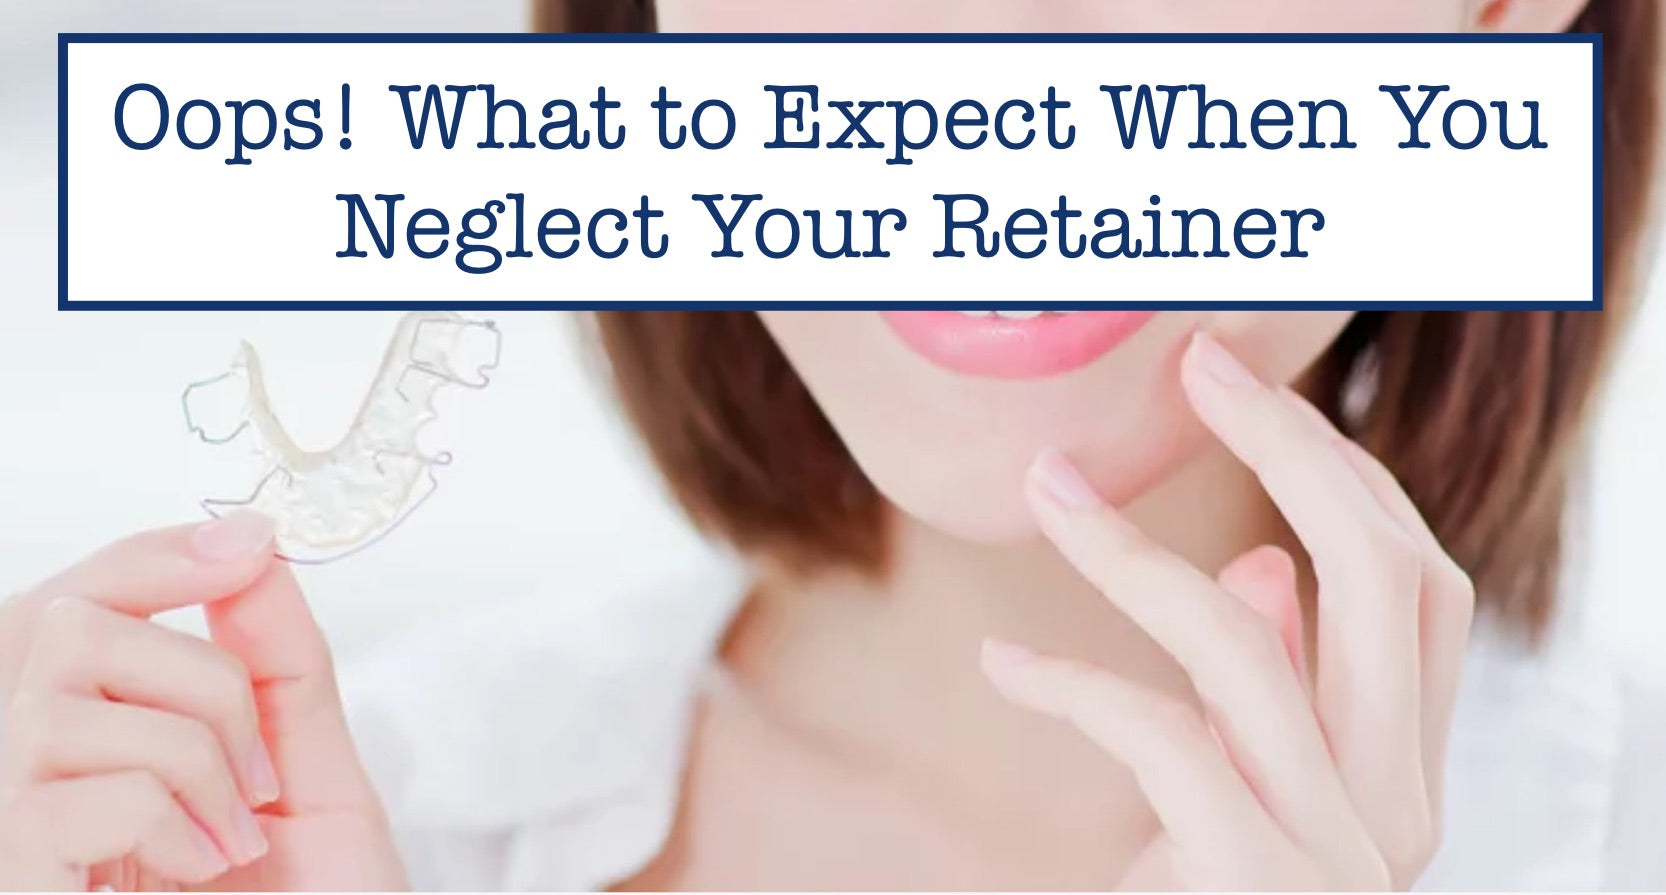 Oops! What to Expect When You Neglect Your Retainer